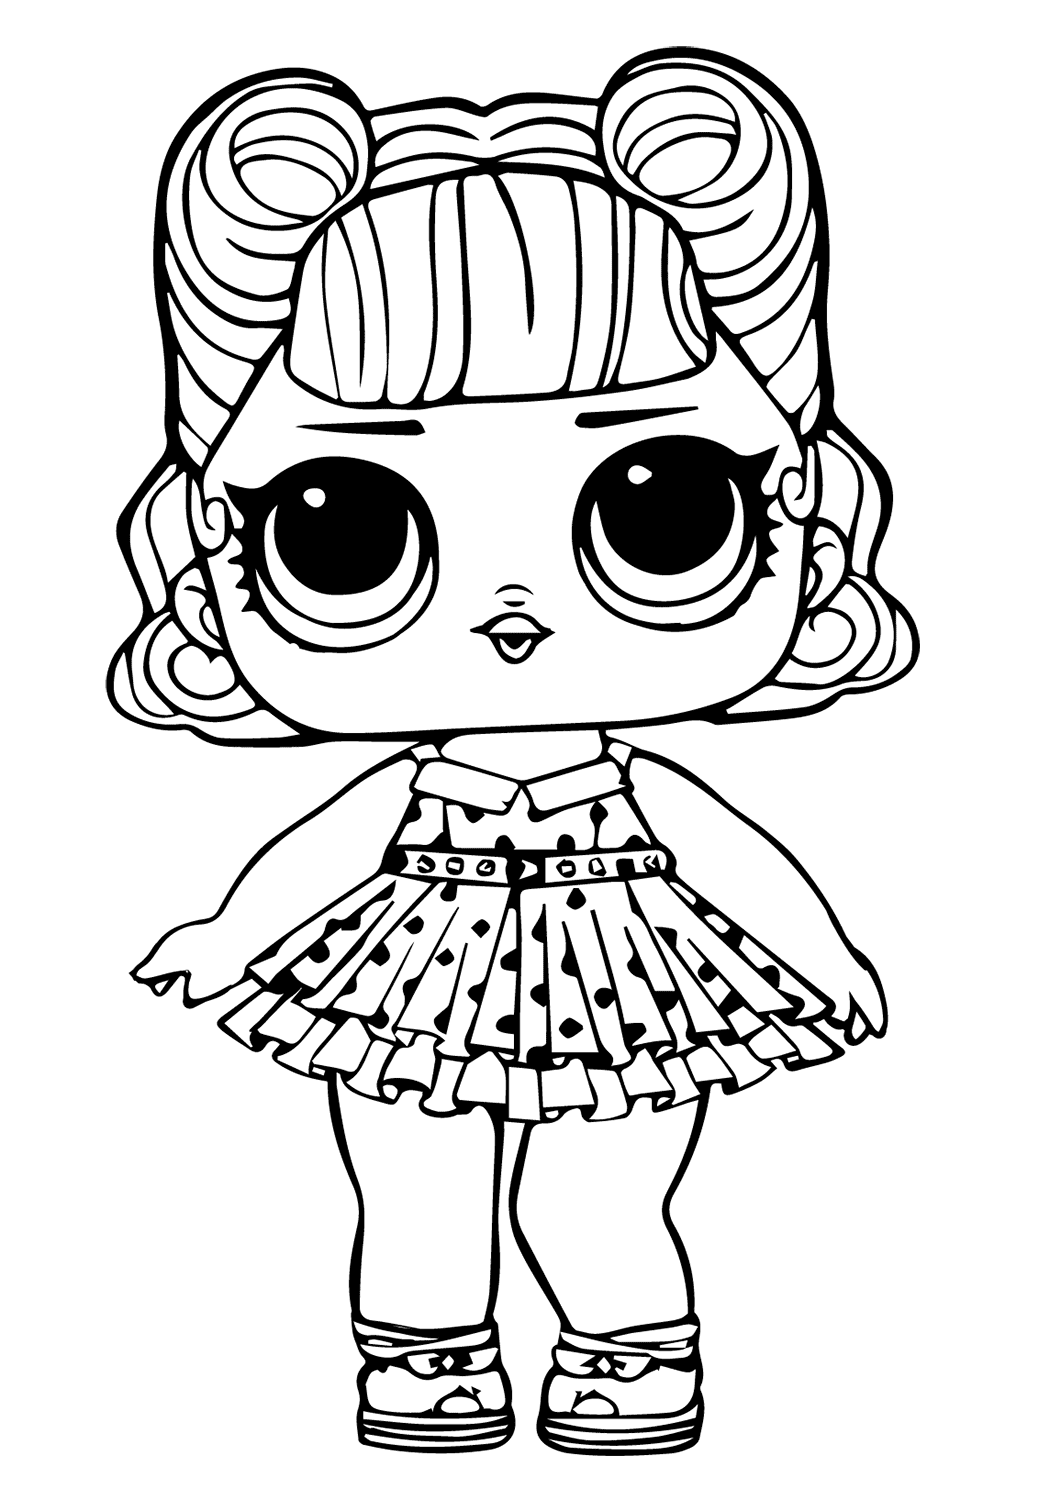 dolls coloring pages 40 free printable lol surprise dolls coloring pages coloring dolls pages 